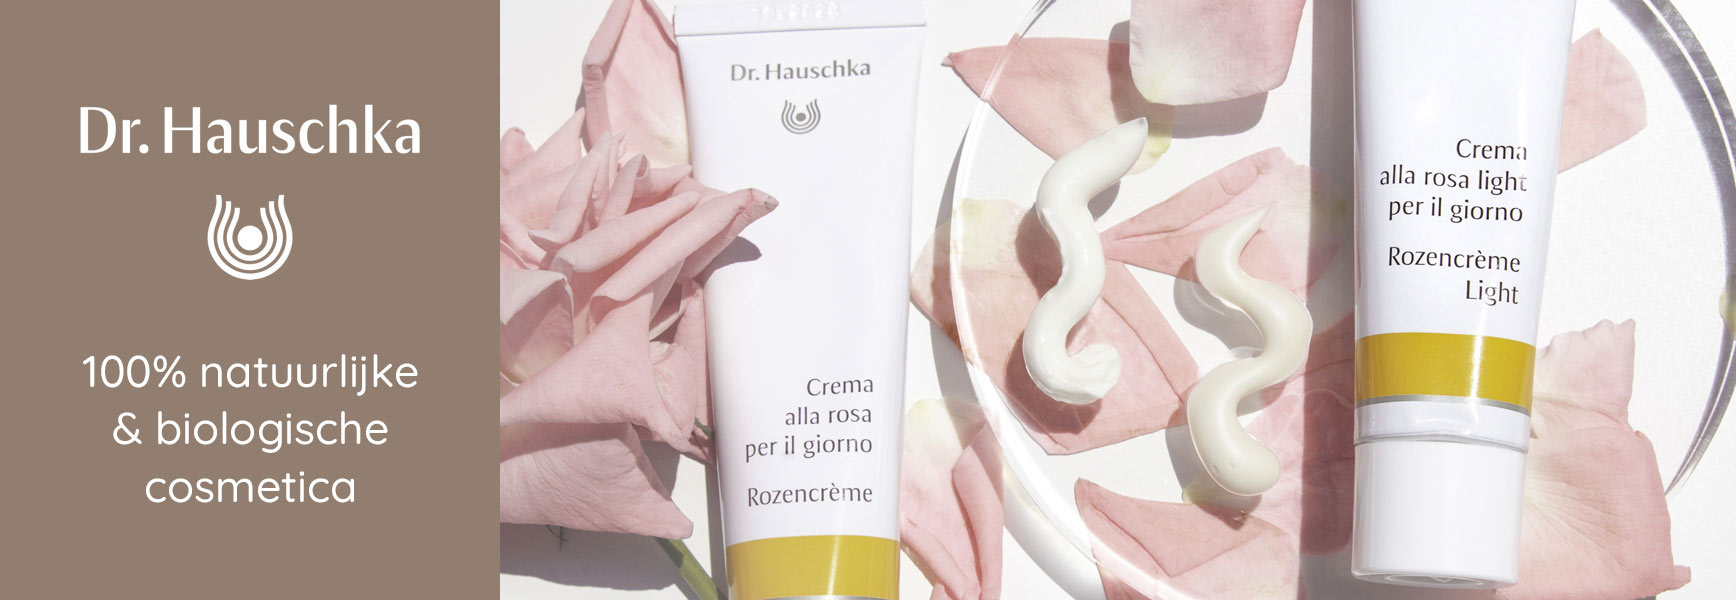 Bermad plank Continent Dr. Hauschka Cosmetica